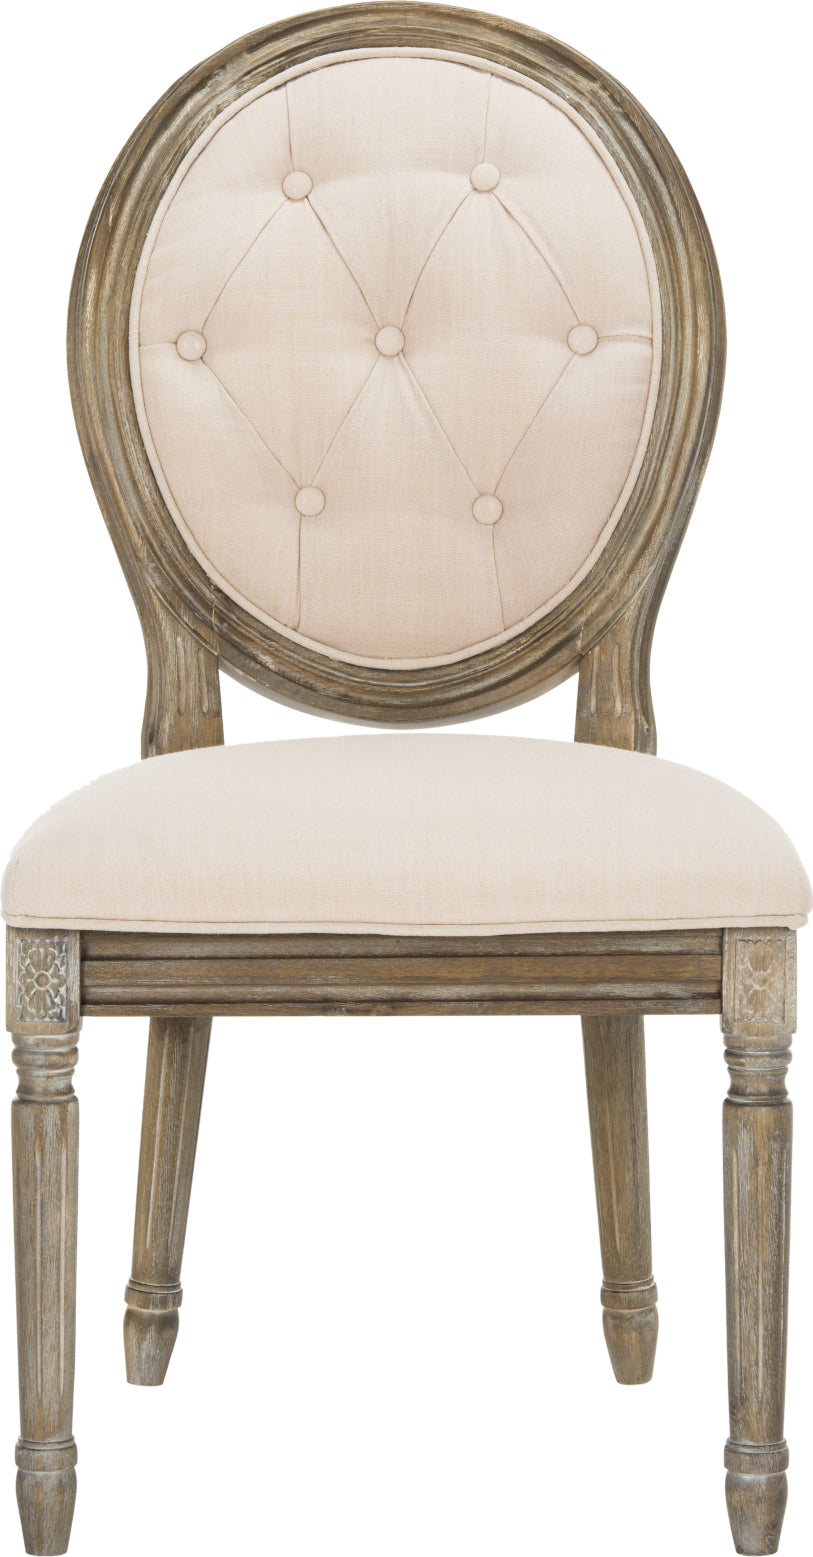 Safavieh Holloway Tufted Oval Side Chair Beige and Rustic Oak Furniture main image